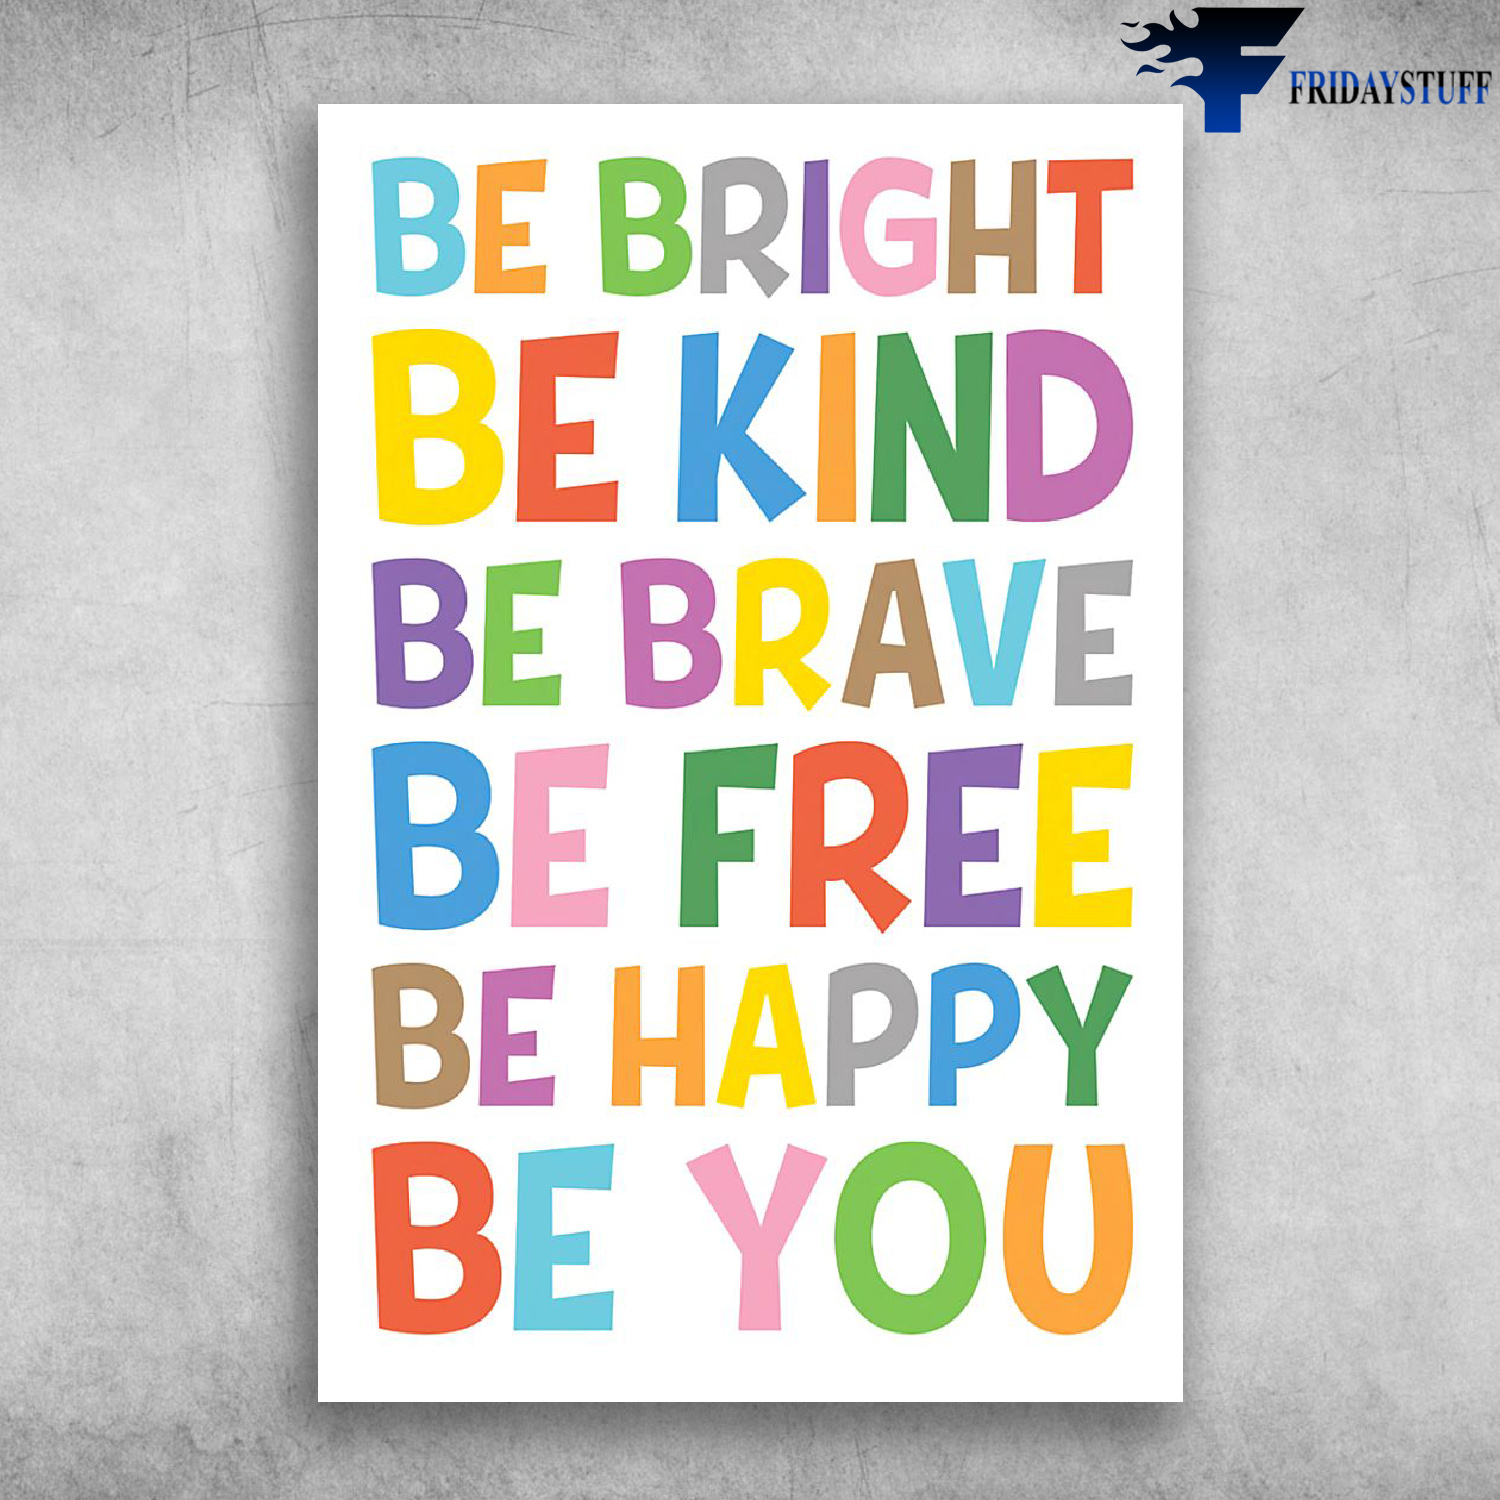 Be Bright Be Kind Be Brave Be Free Be Happy Be You